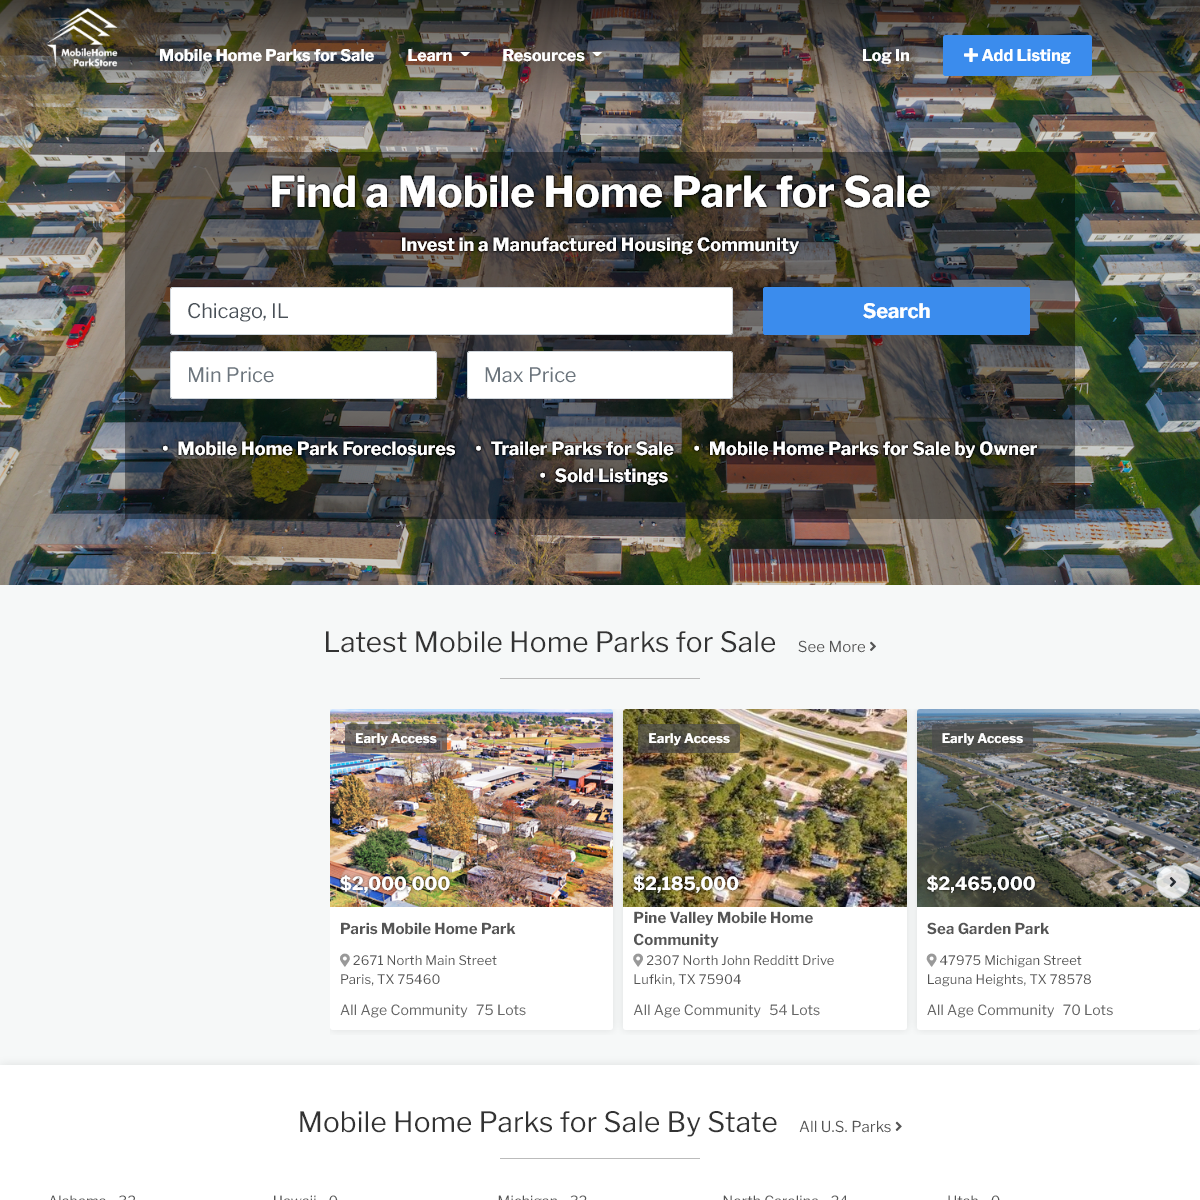 A complete backup of mobilehomeparkstore.com